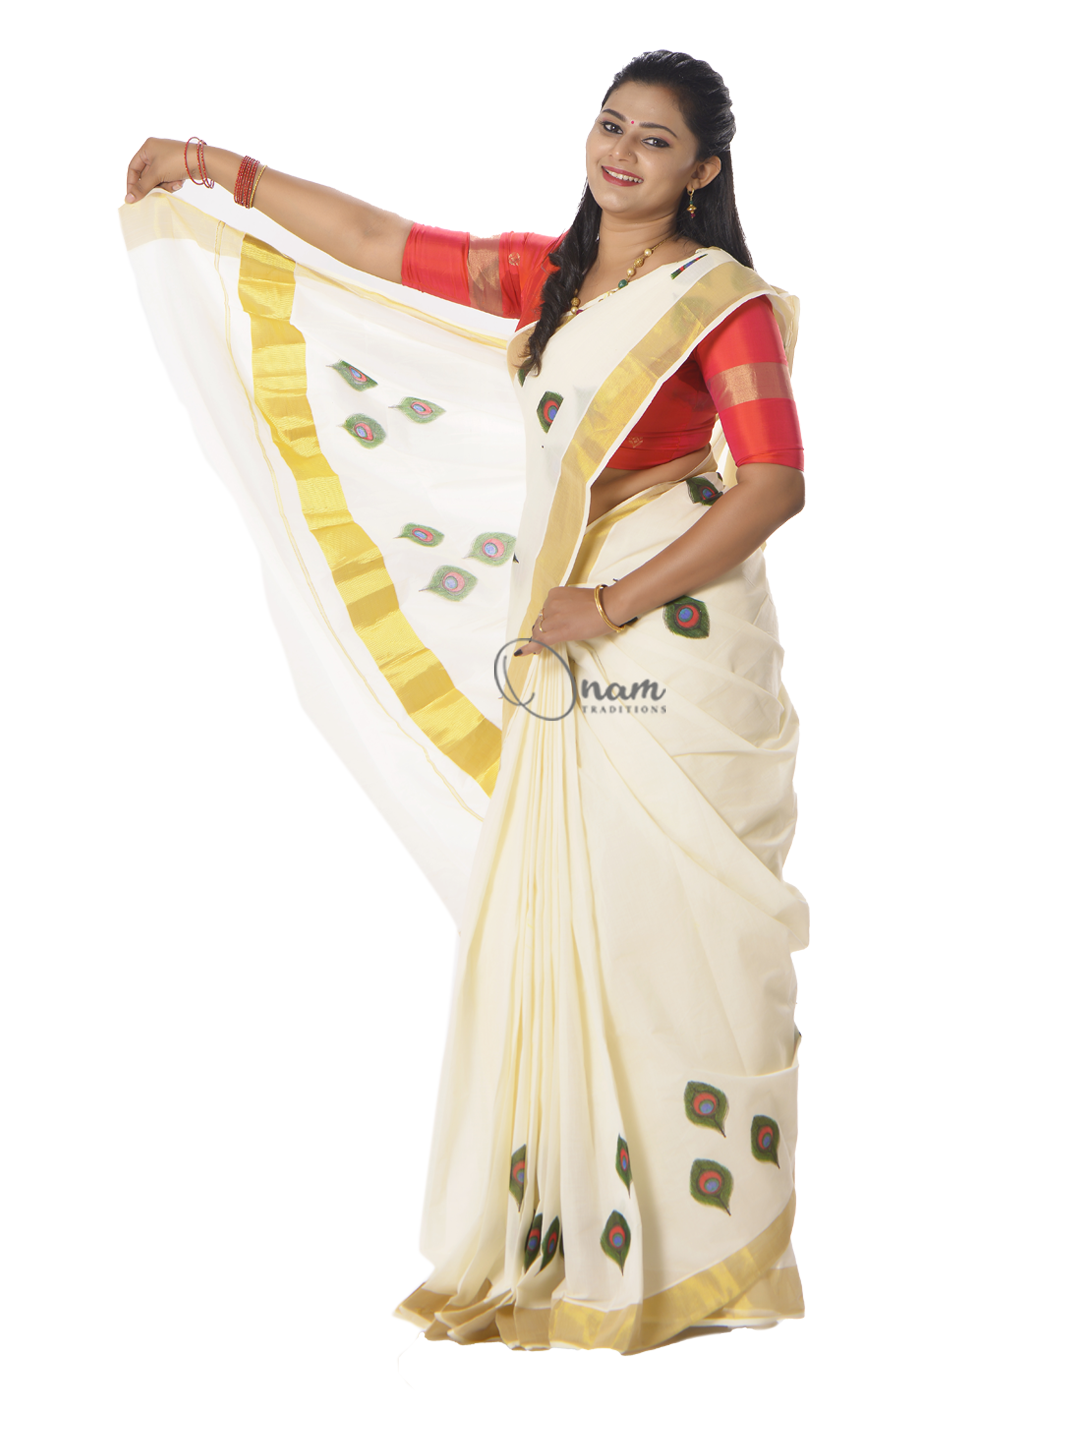 Buy Farico Off-White Kerala Onam Saree - Thick broad border with floral  motifs, thick traditional pallu in gold weave| Kasavu – Cotton Sadi – For  Women | Kerala saree at Amazon.in